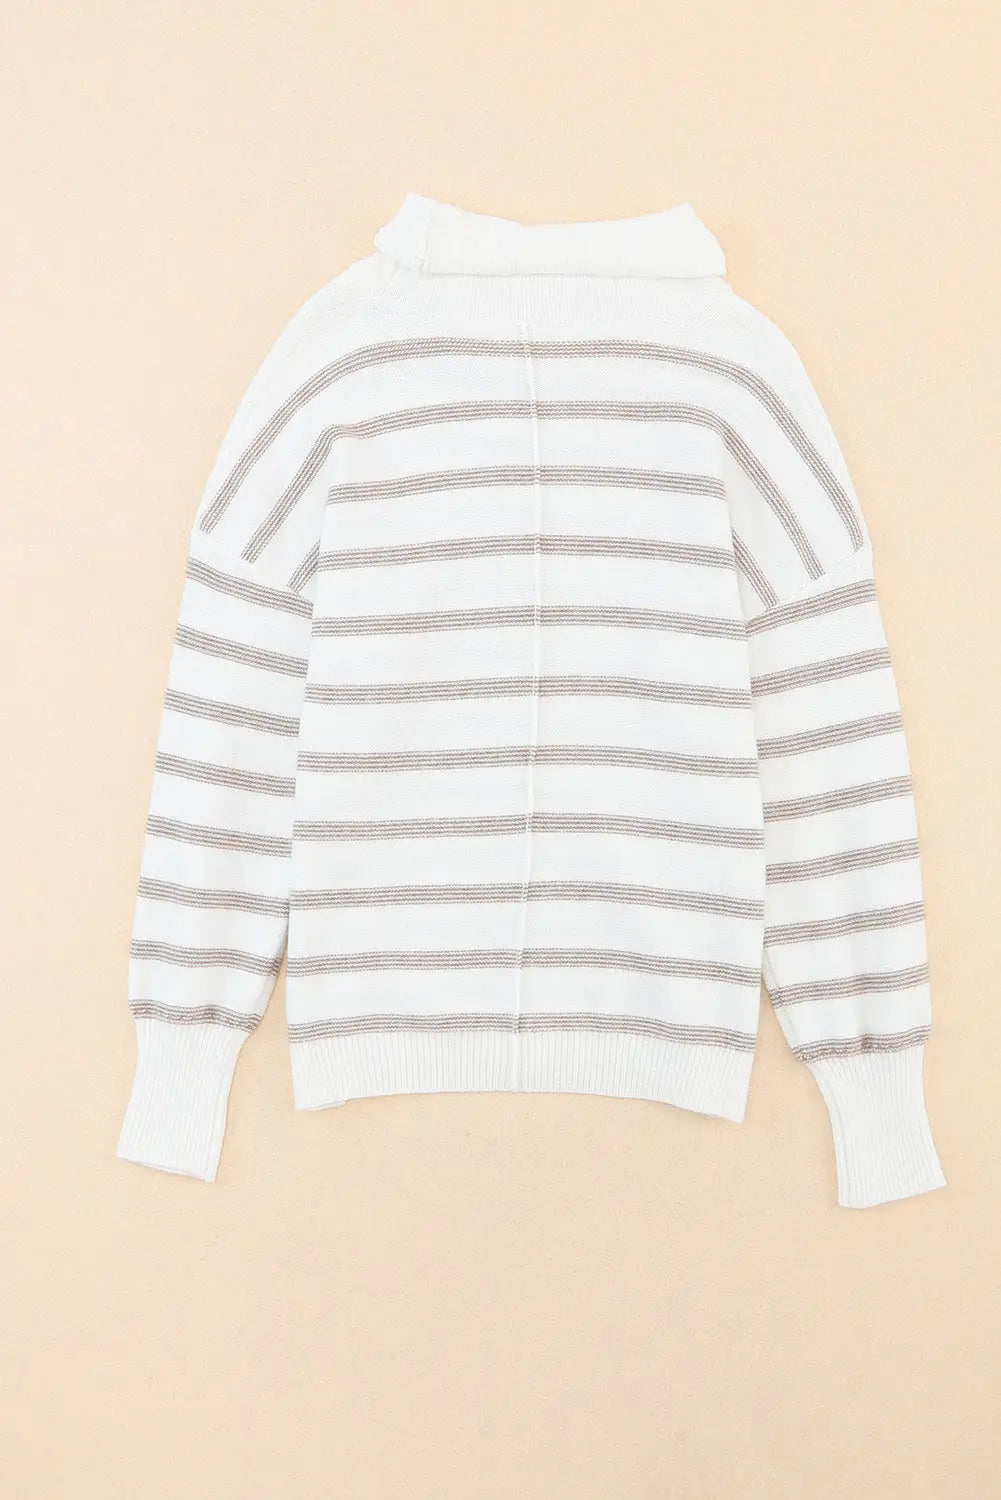 Cowl neck striped print drop shoulder sweater - sweaters & cardigans